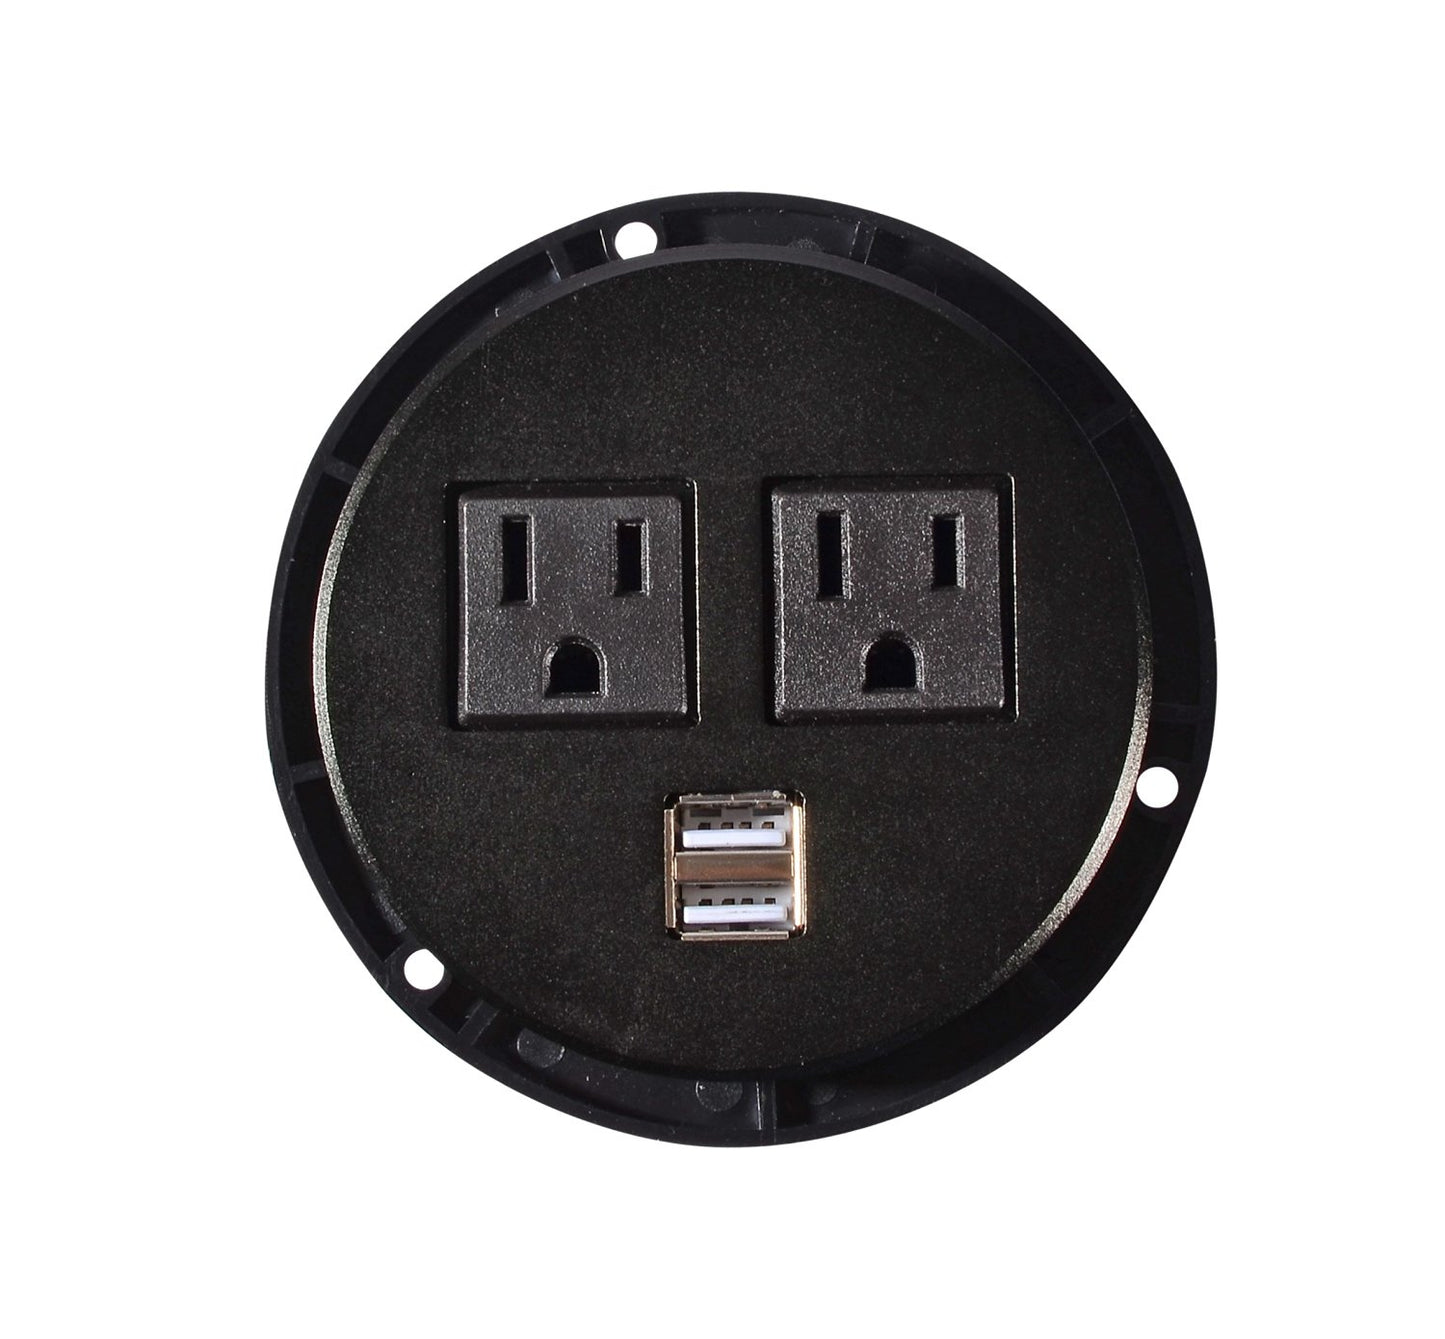 Aluminium Power Data Tap grommet With 2 X AC Outlet And USB Port